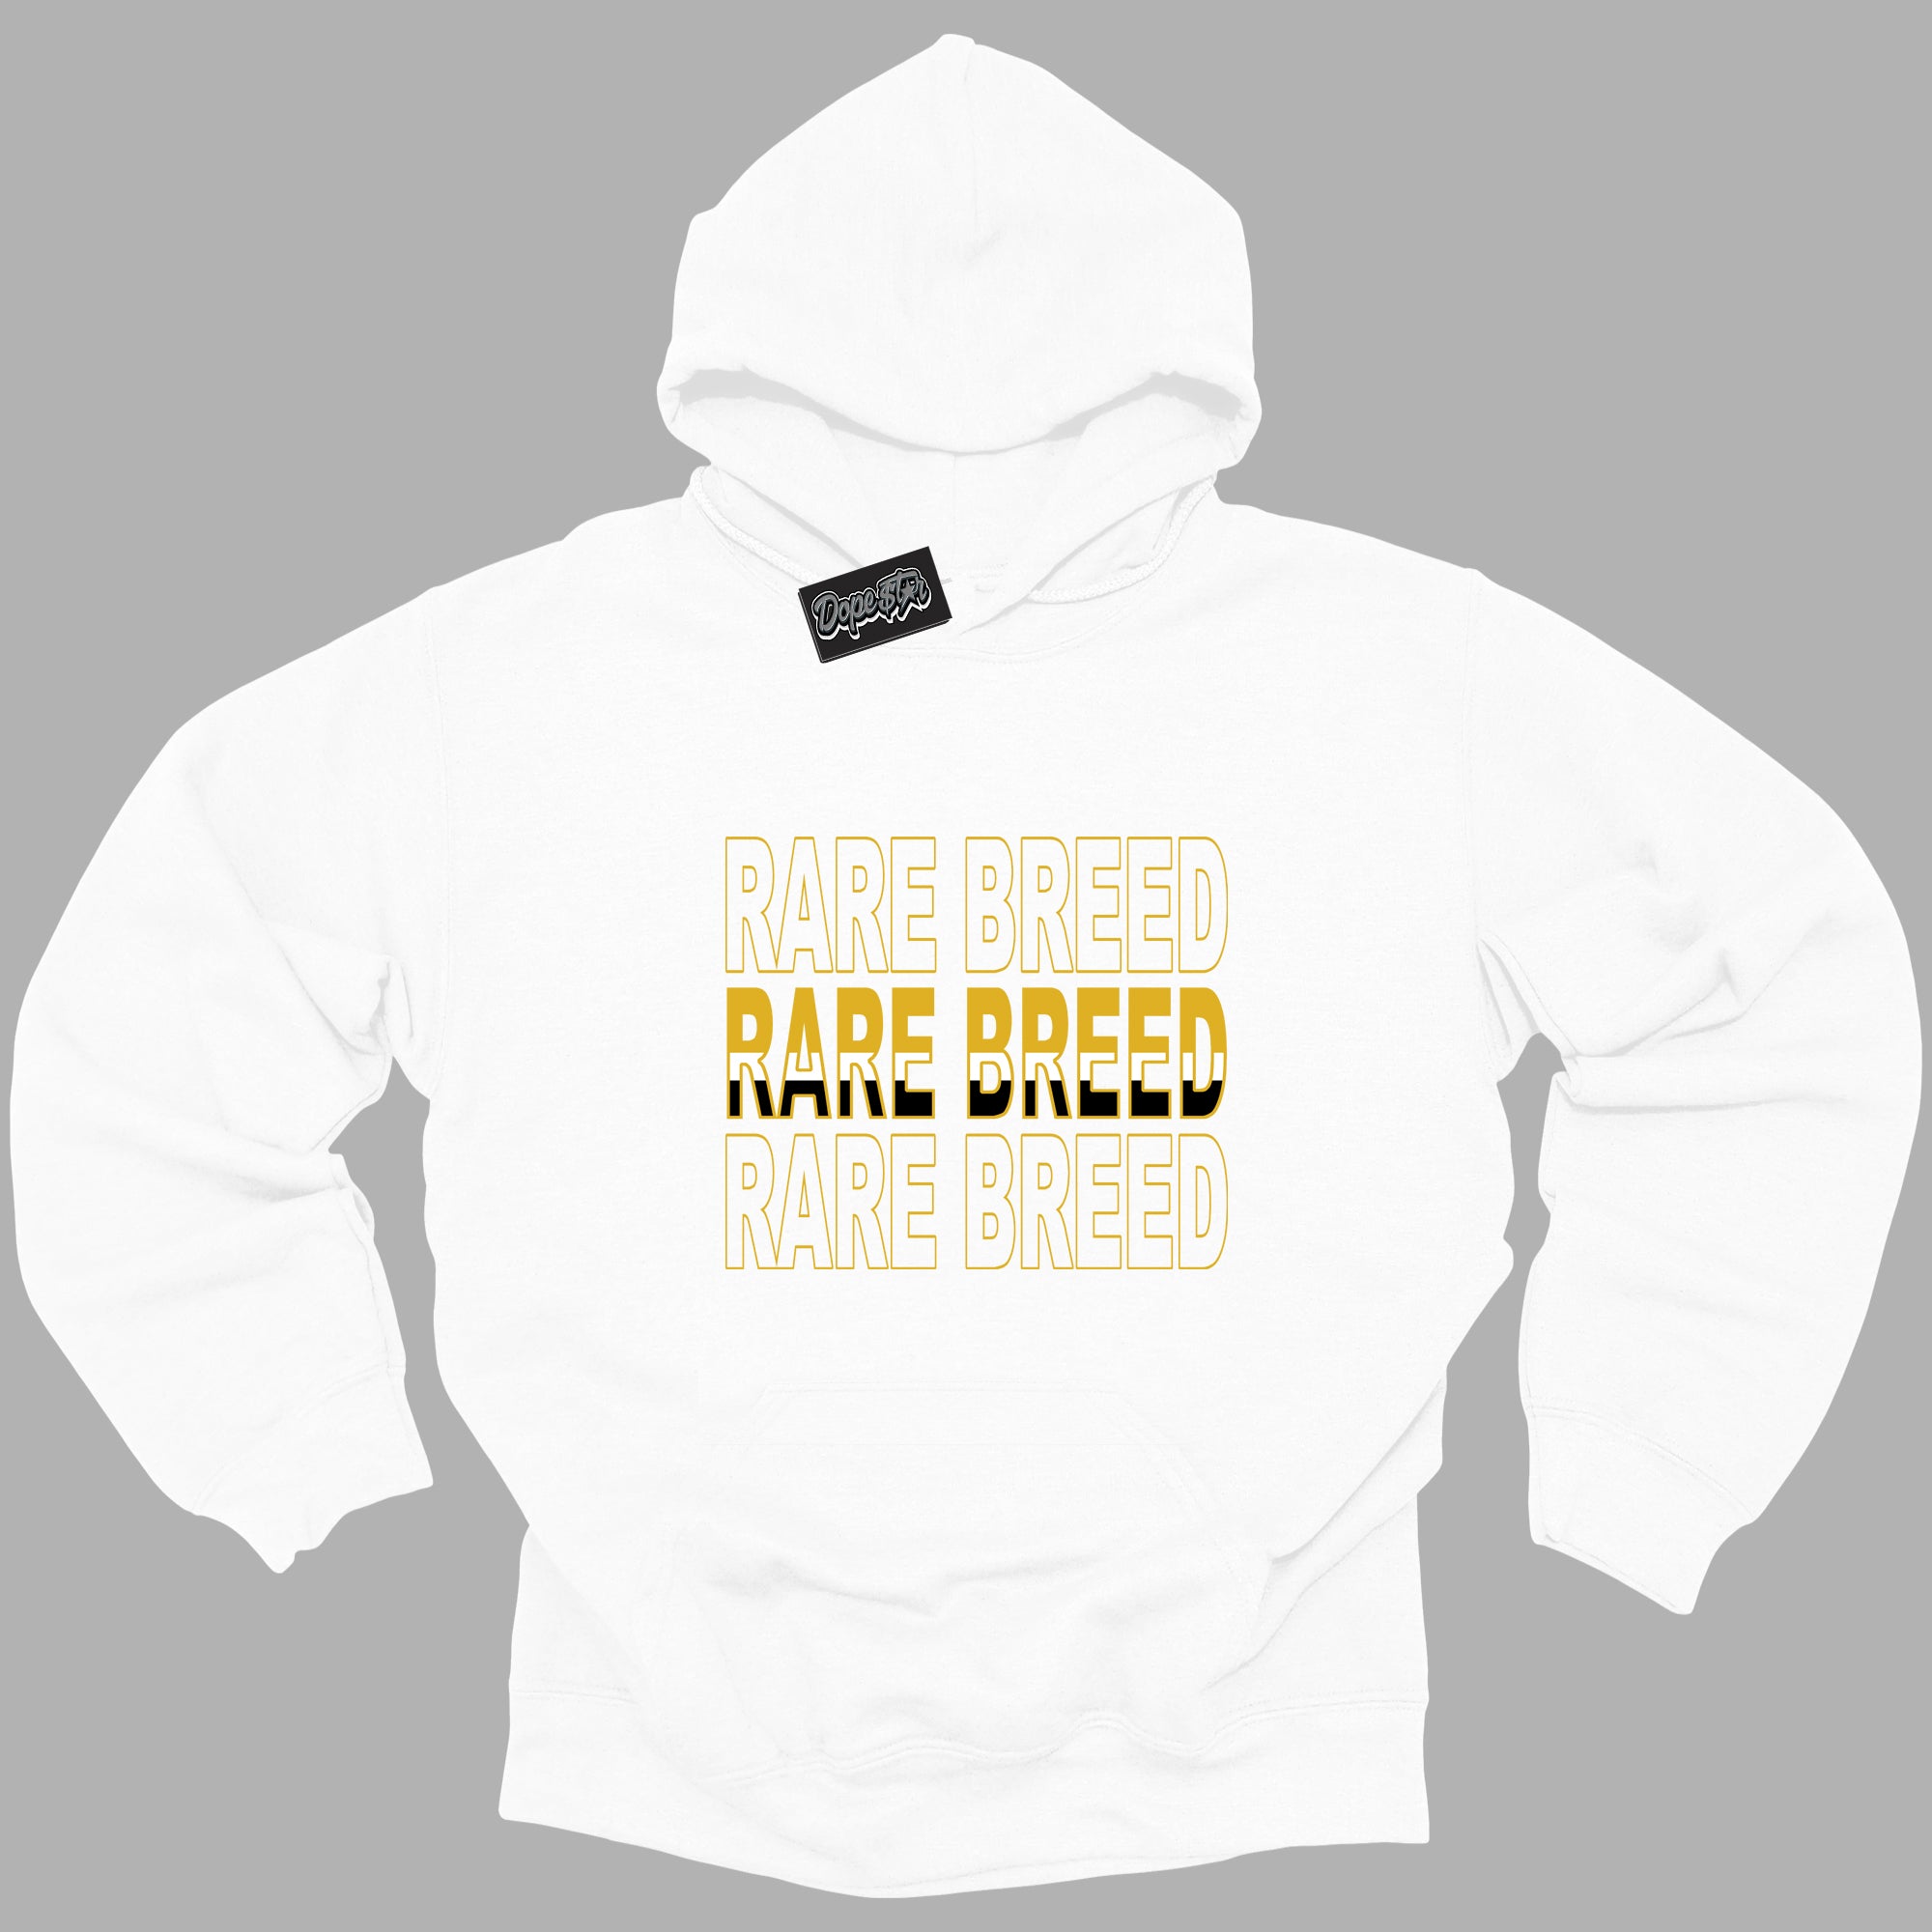 Cool White Hoodie with “ Rare Breed ”  design that Perfectly Matches Yellow Ochre 6s Sneakers.